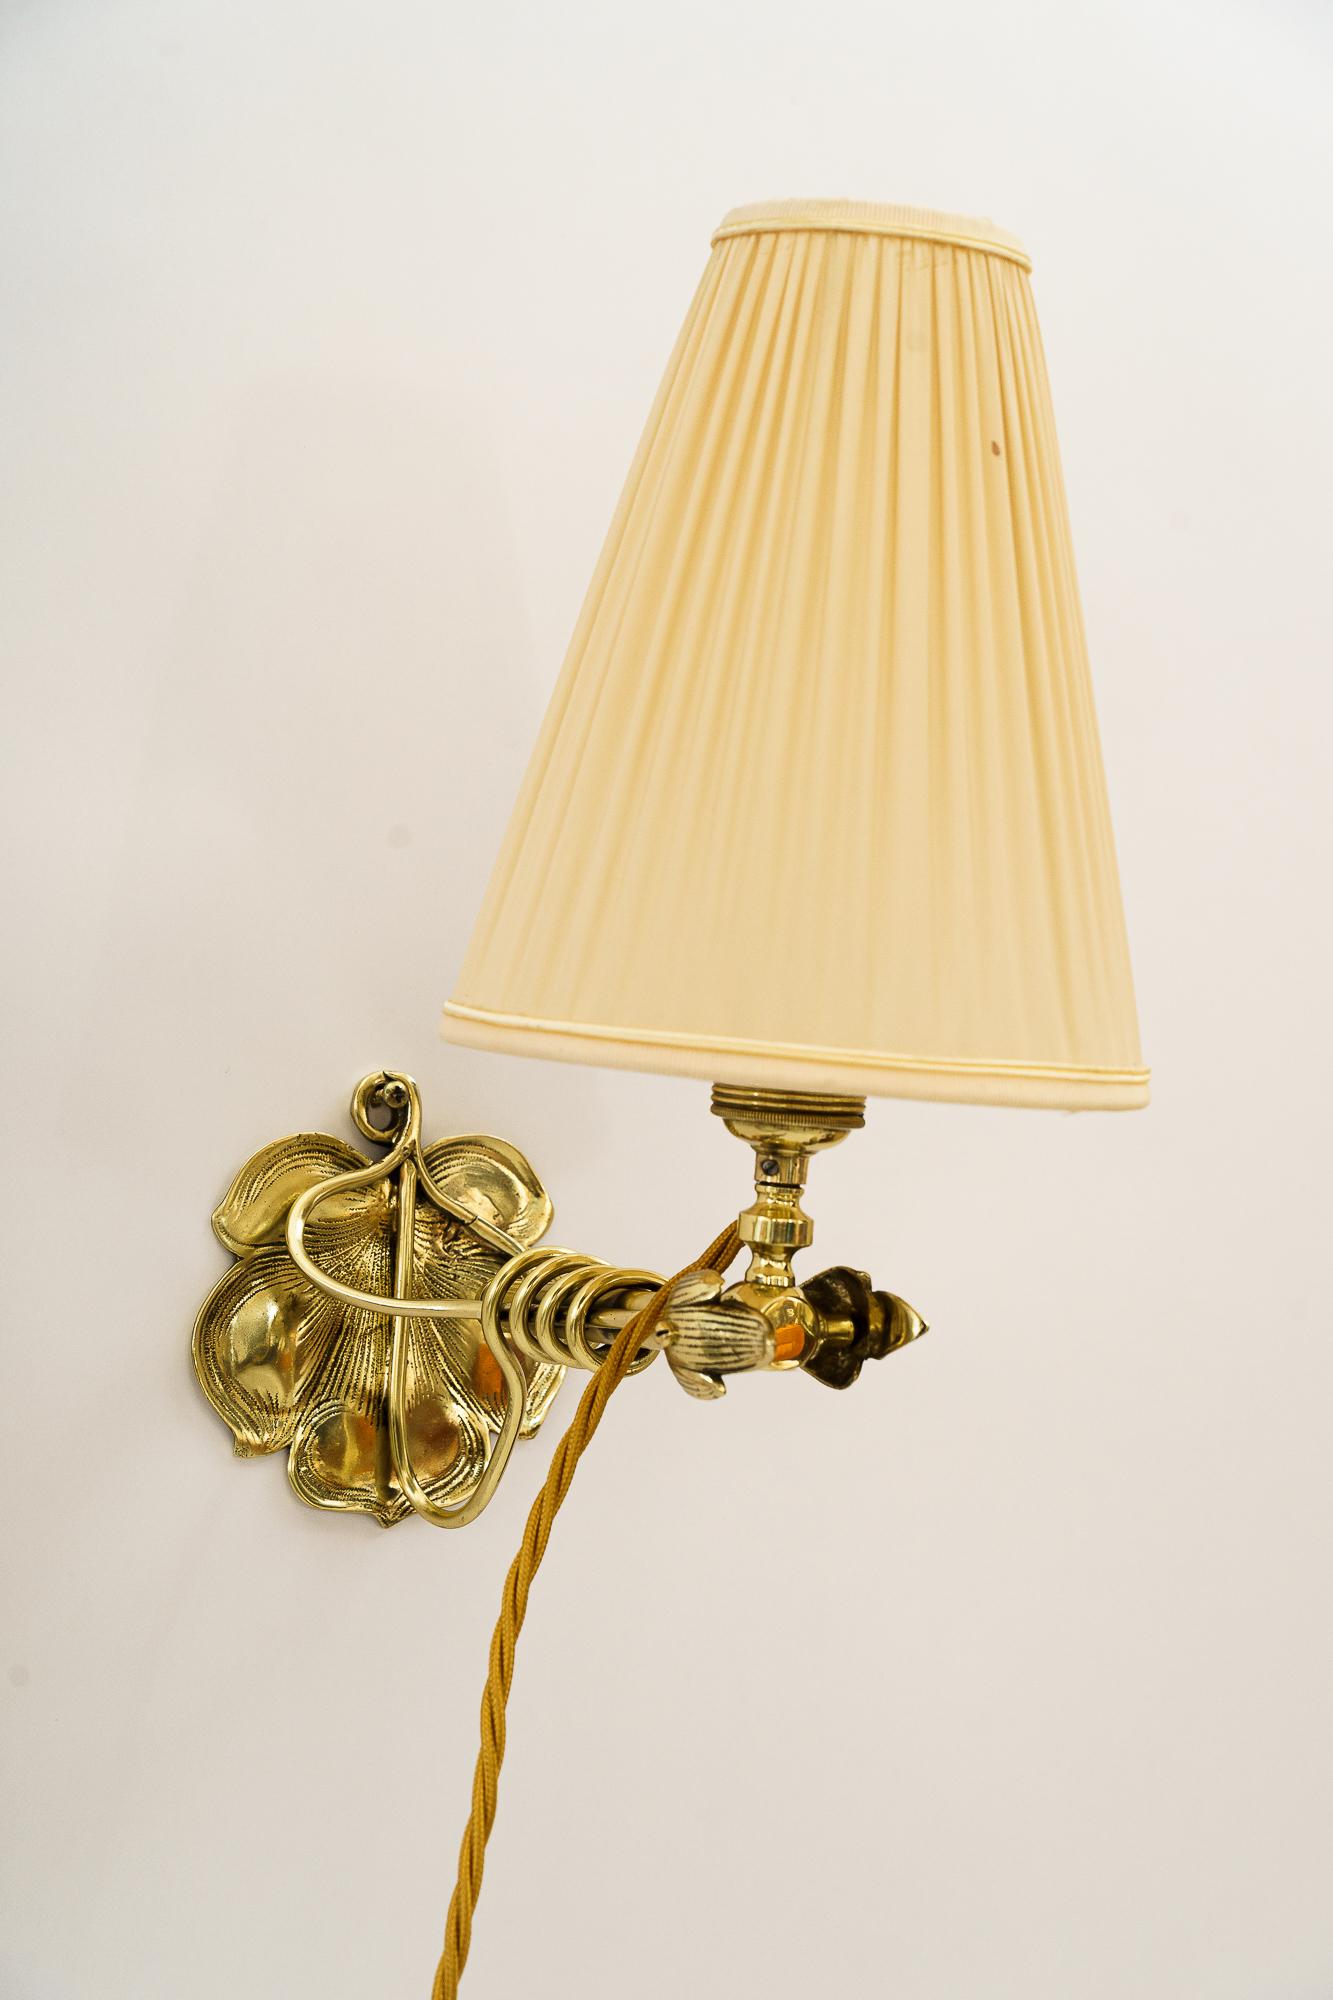 Jugendstil table lamp or wall lamp vienna around 1908
Brass polished and stove enameled
The second picture shows the lamp as a wall lamp.
The shade is replaced ( new )